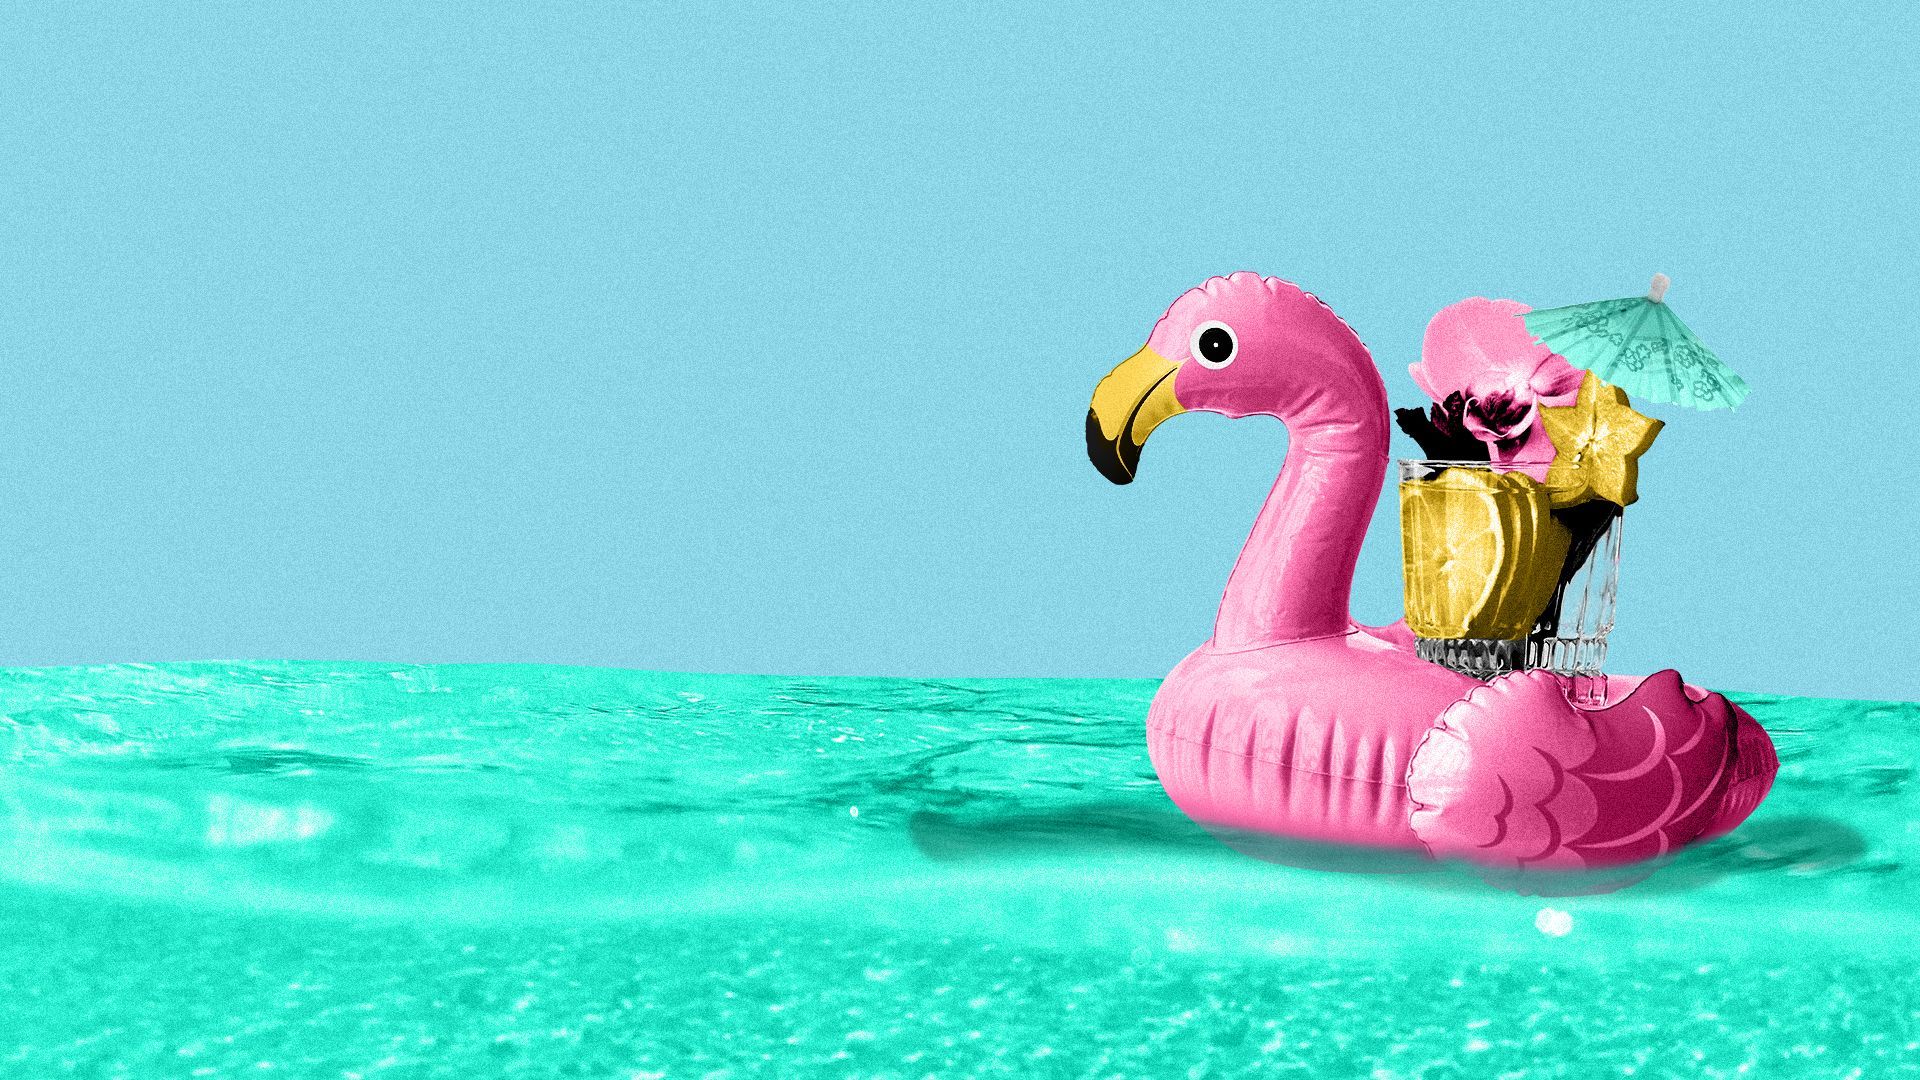 Illustration of a drink on a flamingo pool float.